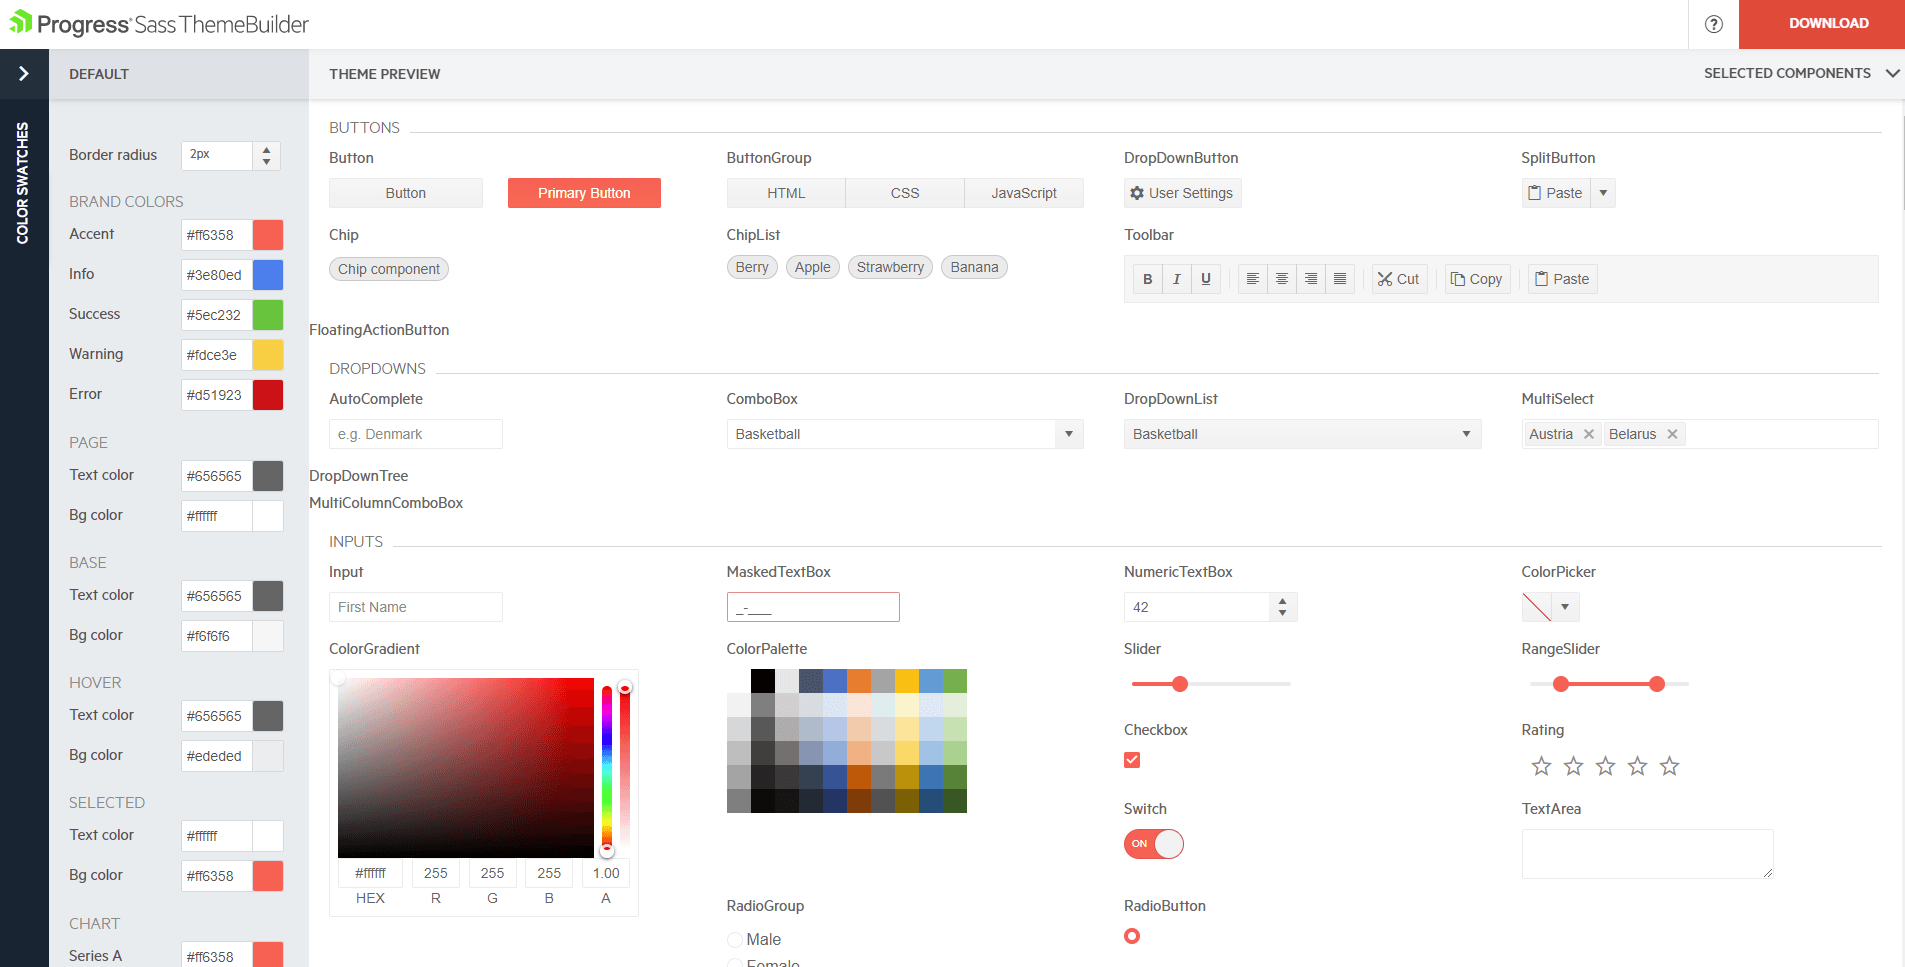 Theme Builder UI has a side bar with a list of default brand colors, page colors, base, hover, selected, chart. The theme preview lists various components and shows a preview of them, including buttons, dropdowns, inputs.